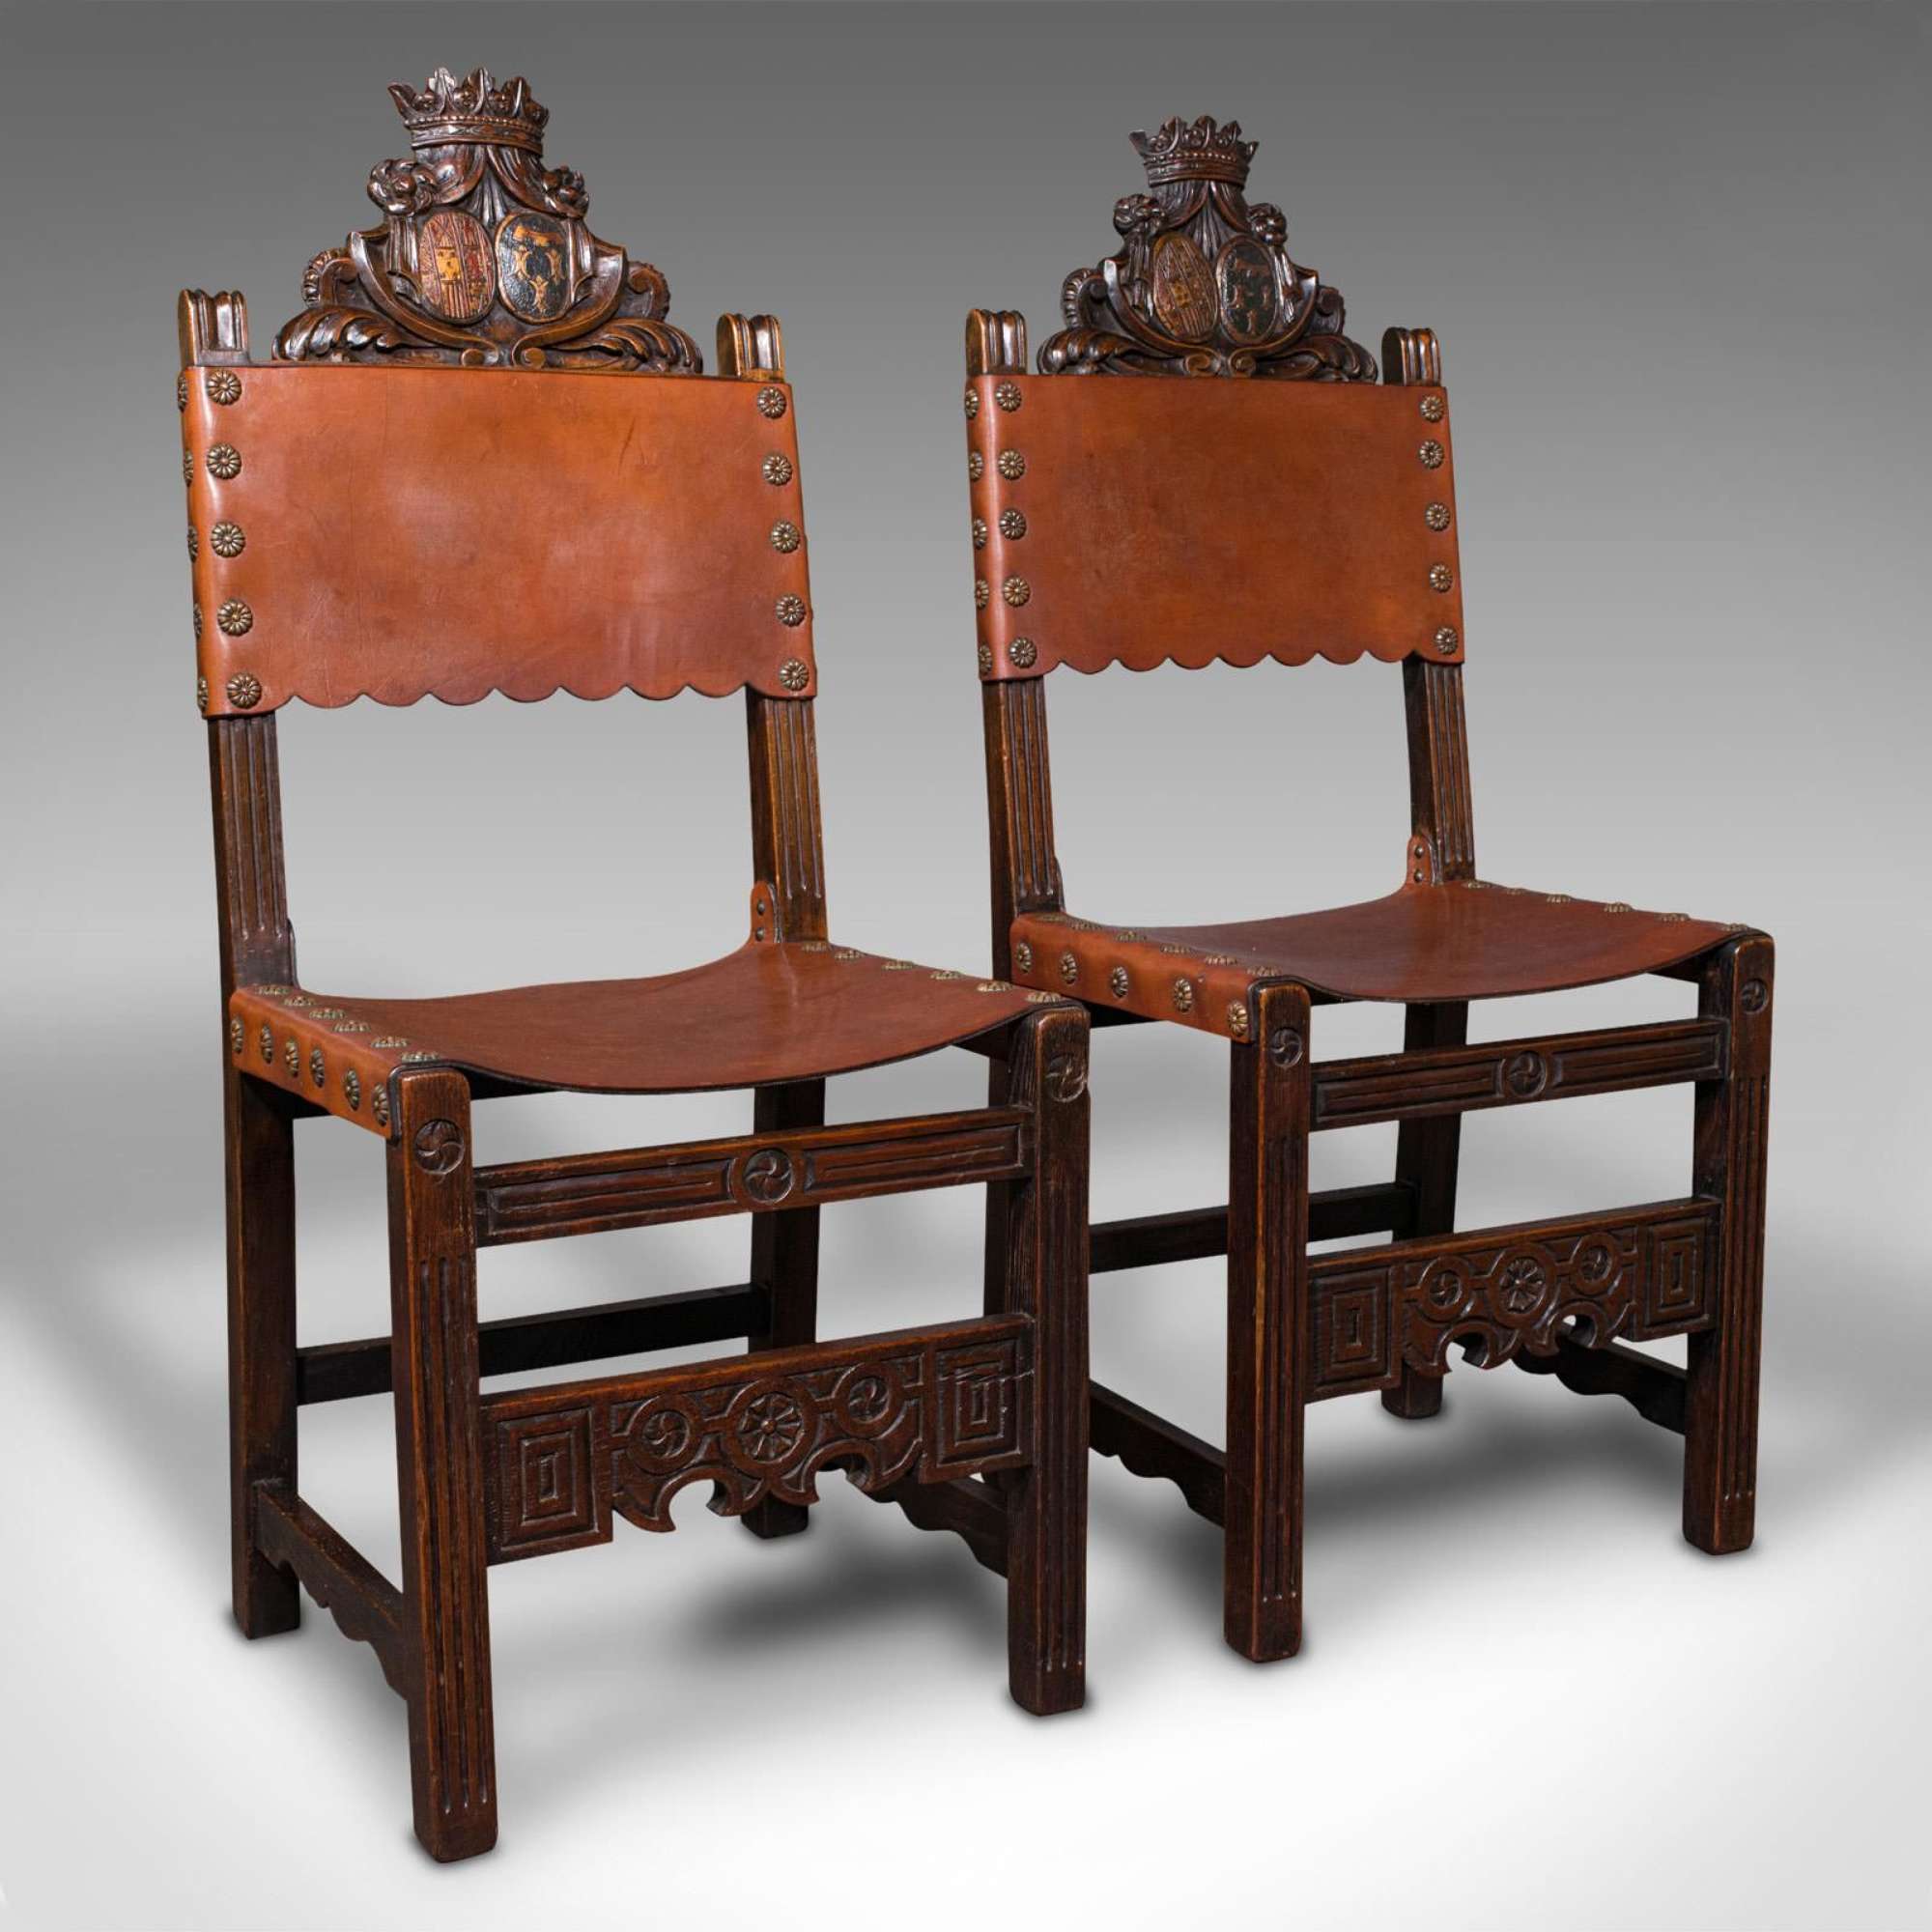 Pair of Antique Hall Seats, Scottish, Side Chair, Jacobean Revival, Edwardian